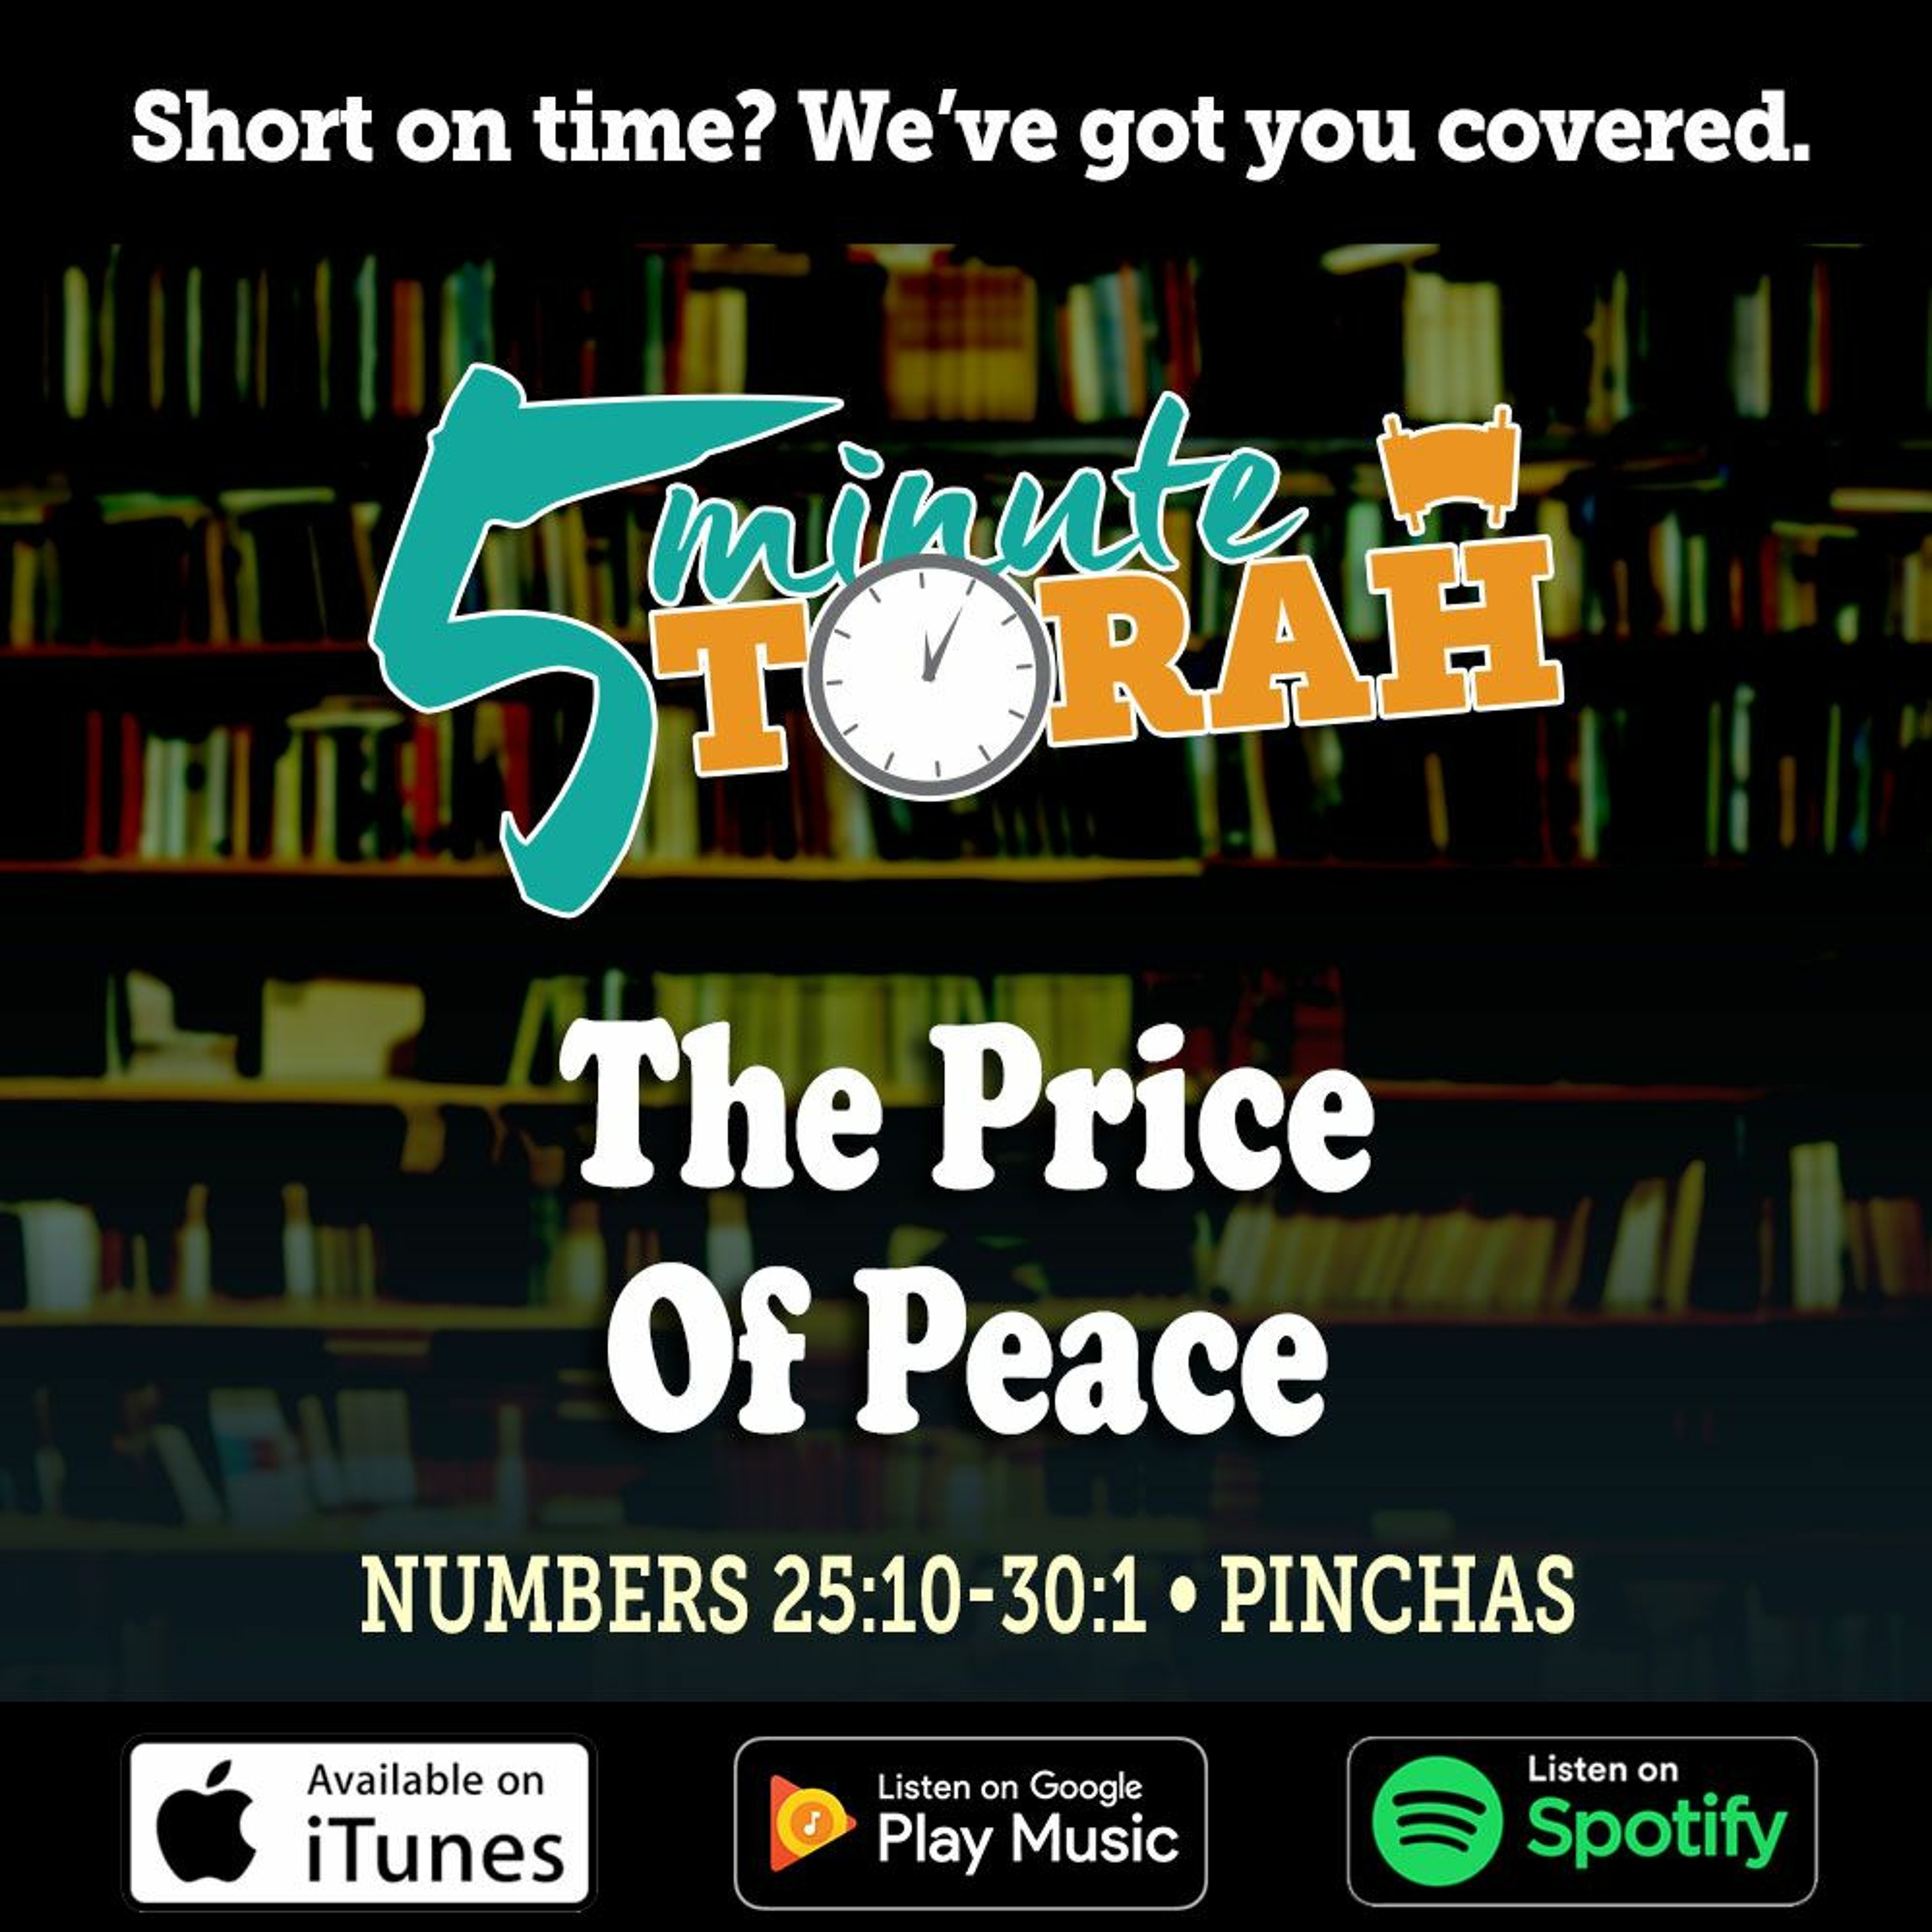 Parashat Pinchas - The Price of Peace